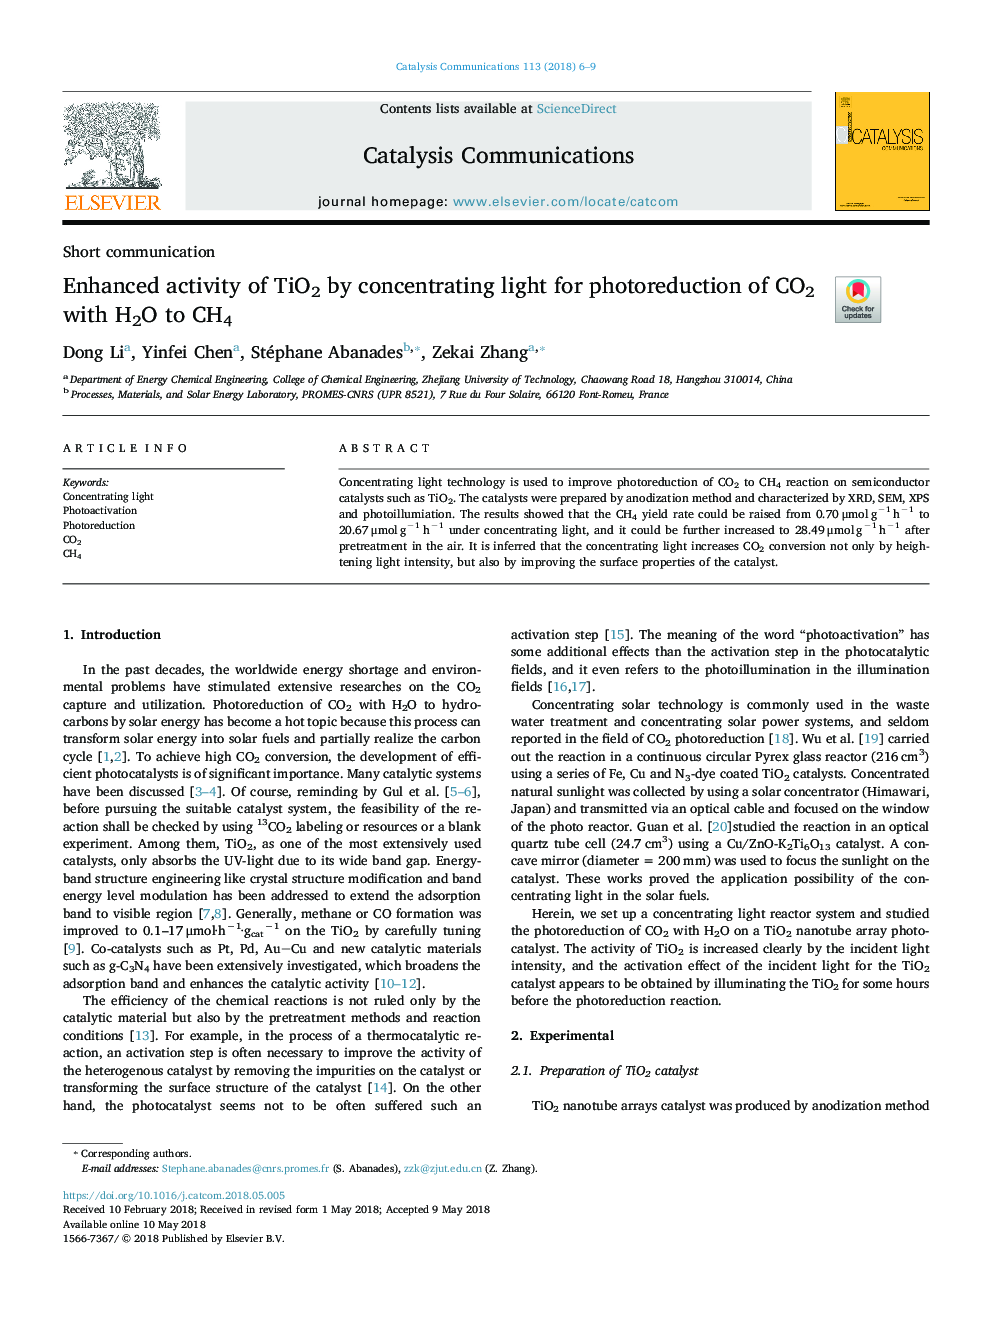 Enhanced activity of TiO2 by concentrating light for photoreduction of CO2 with H2O to CH4